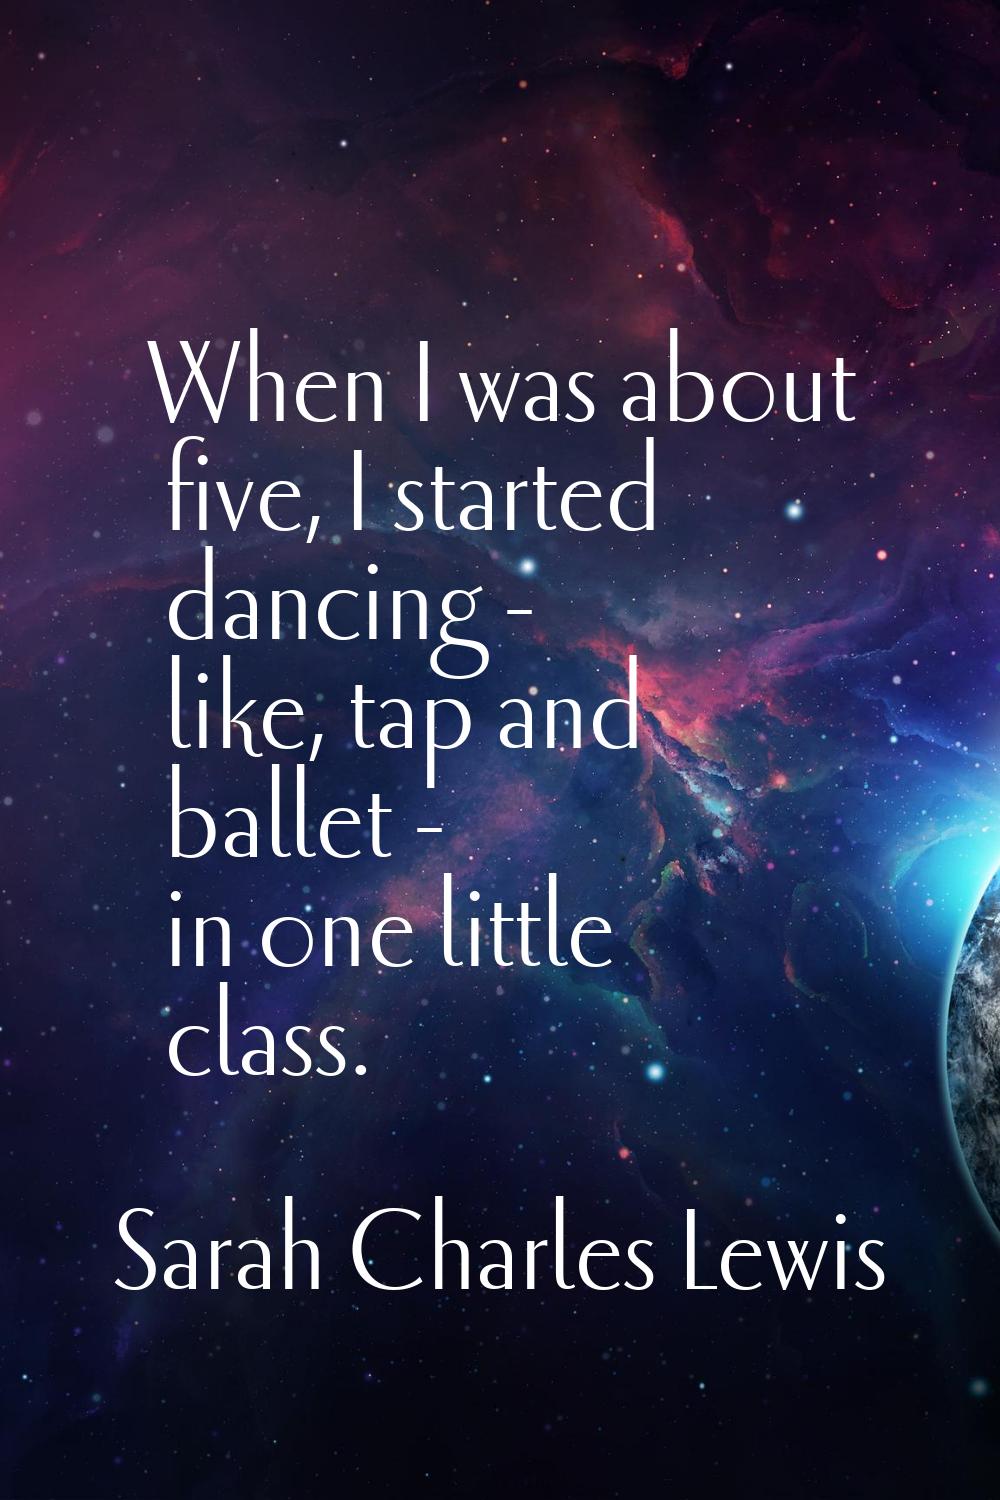 When I was about five, I started dancing - like, tap and ballet - in one little class.